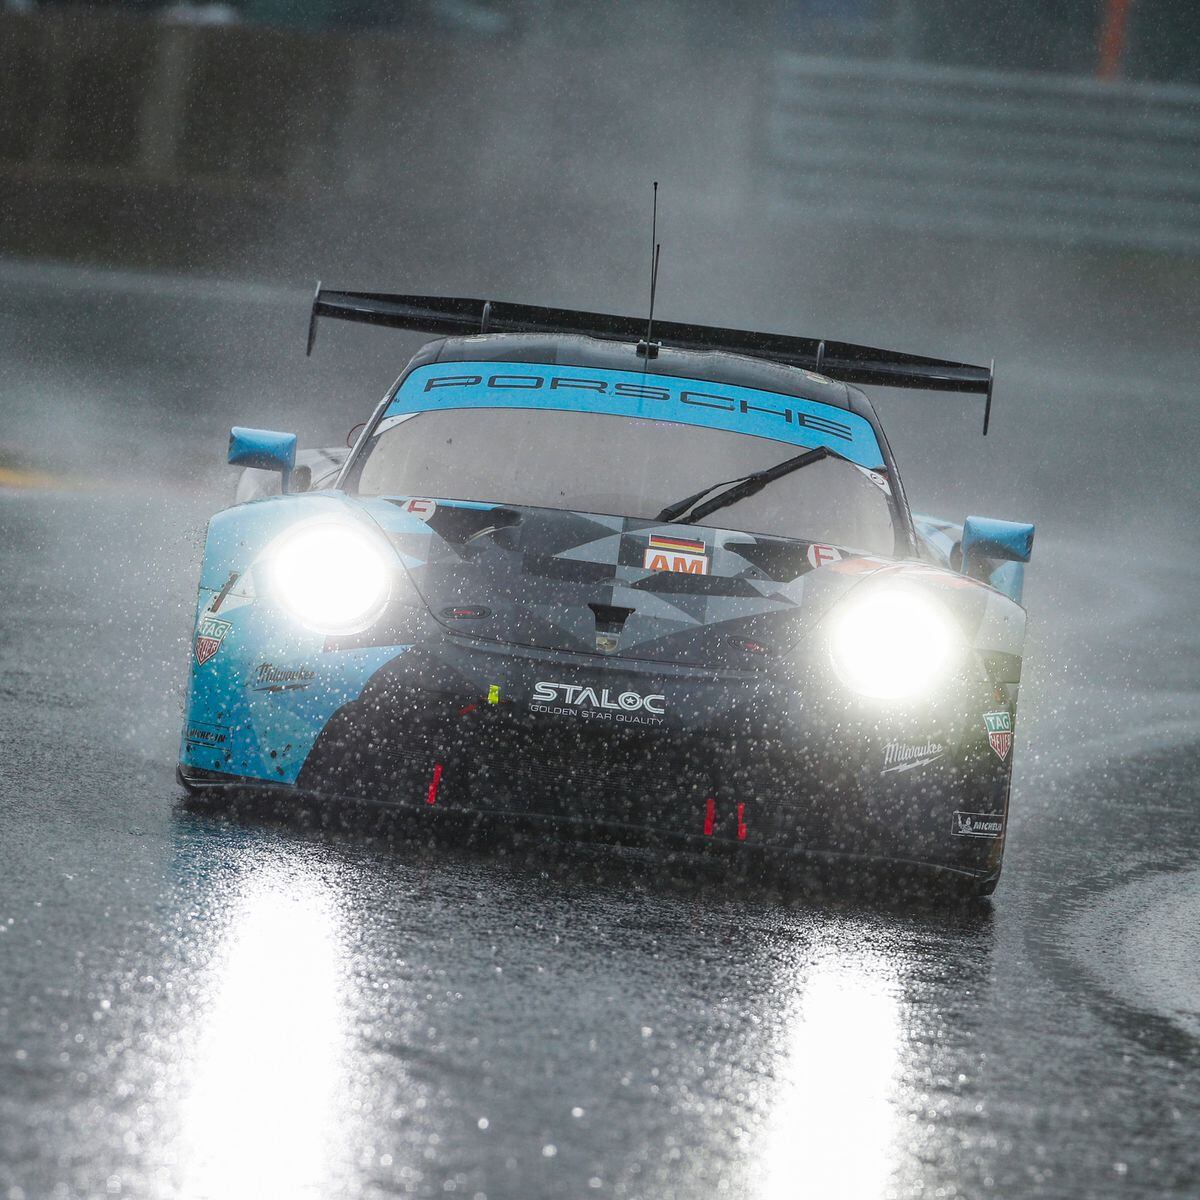 The Dempsey Proton Racing team won the LMGTE Am class in the rain at the Six Hours of Spa-Francorchamps. (Picture from Porsche Motorsport, 30802661)